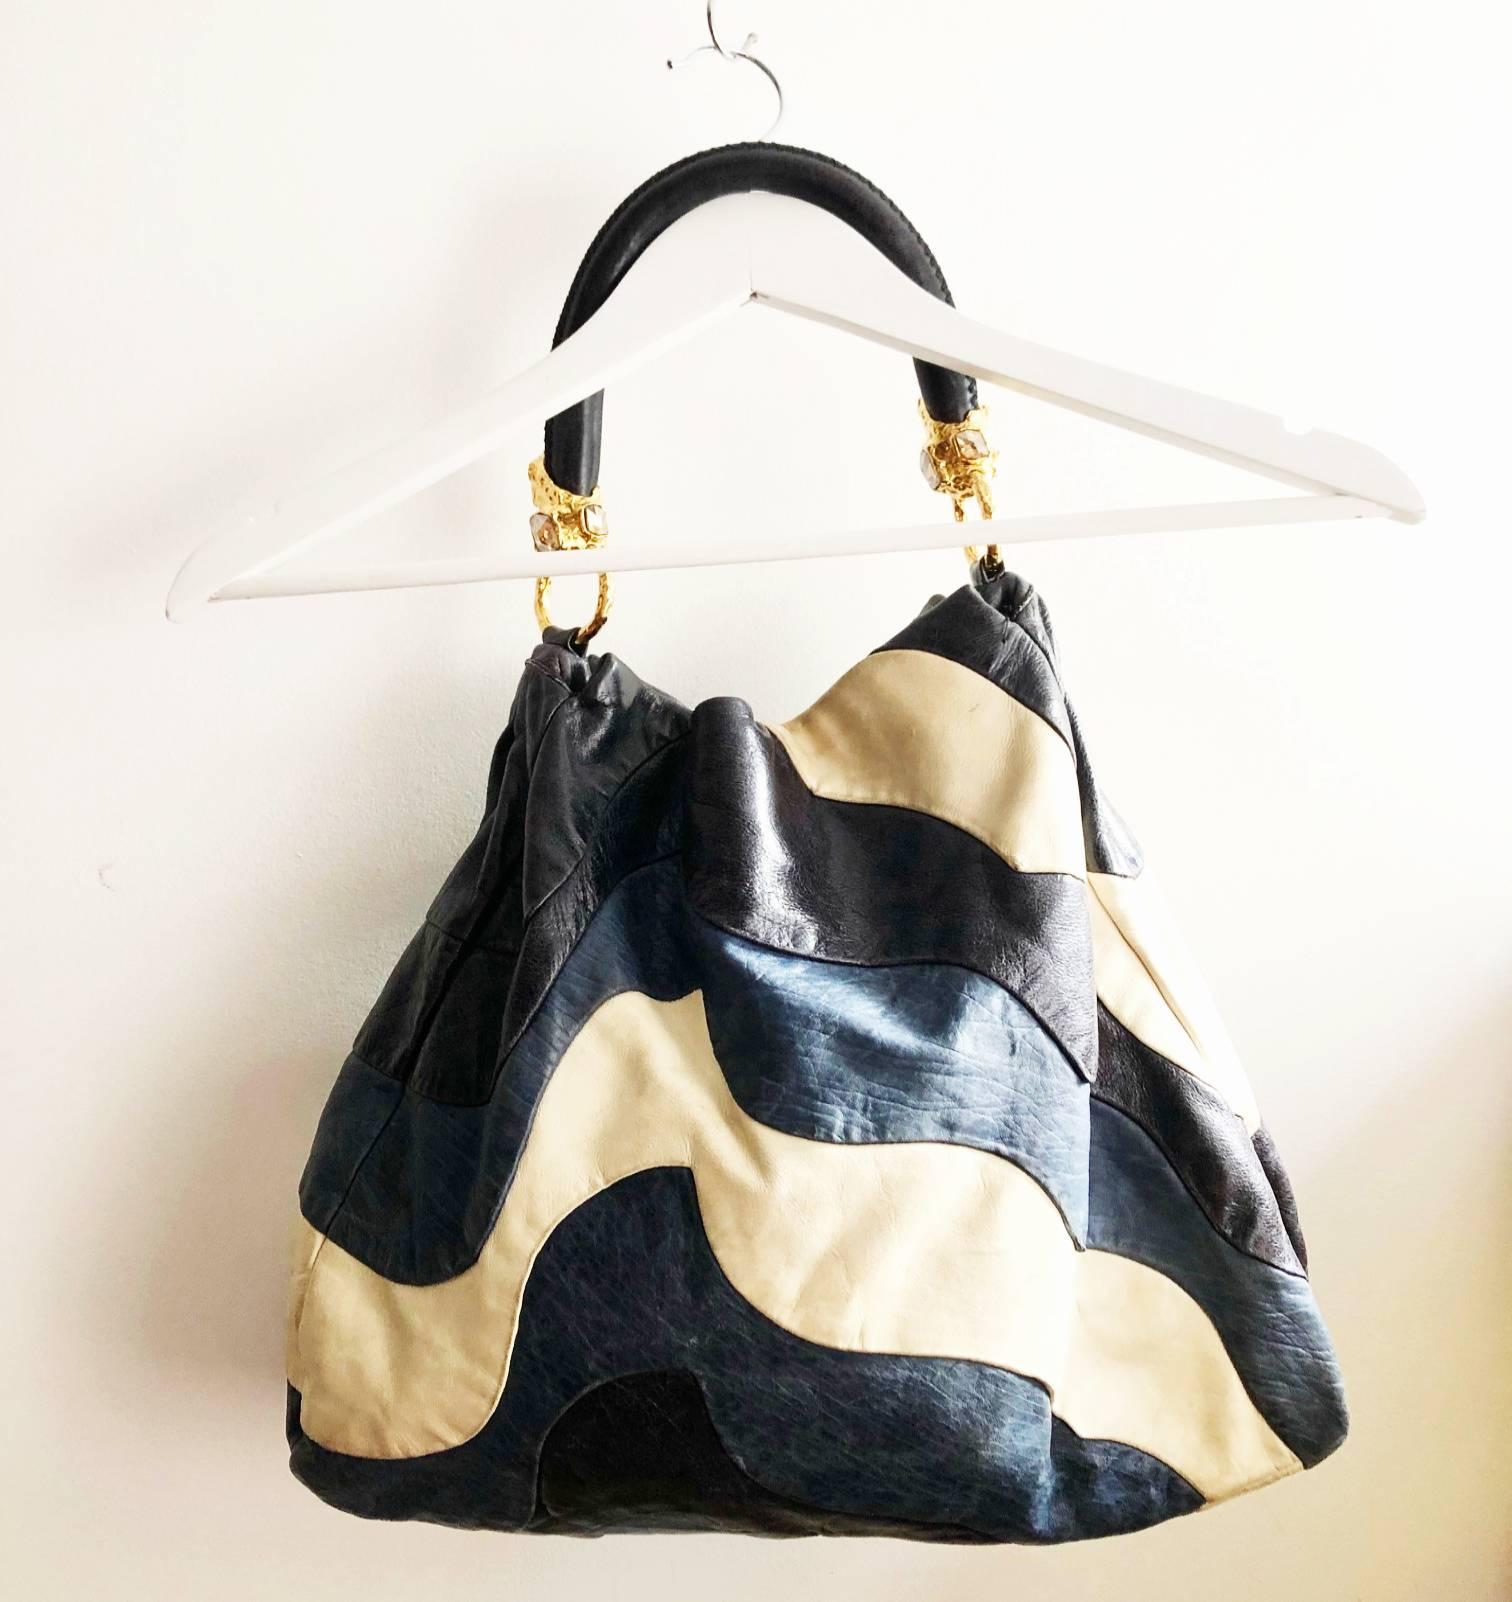 FREE UK and WORLDWIDE DELIVERY 
miu miu tri colour leather shoulder bag, blue and black wave design, gold tone logo on side, gold tone metal ware with beautiful stones, the bag is an stunning item. it adds a twist to a denim outfit yest